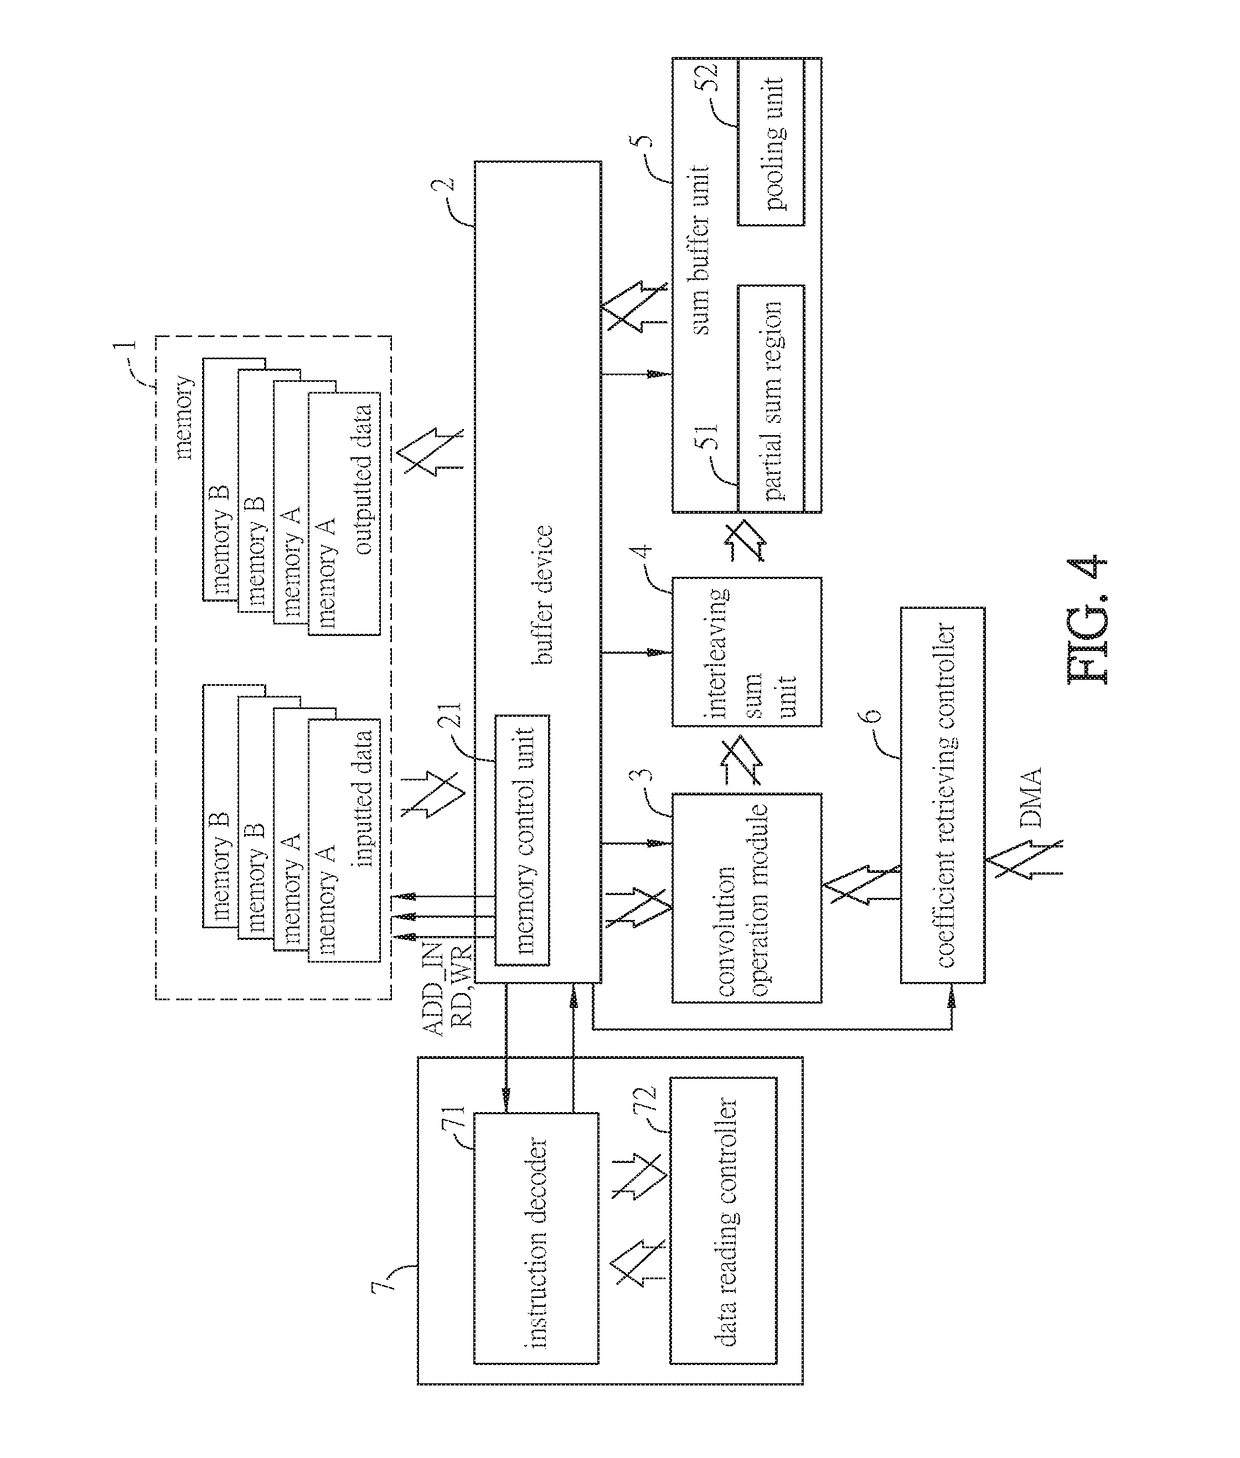 Operation device and method for convolutional neural network